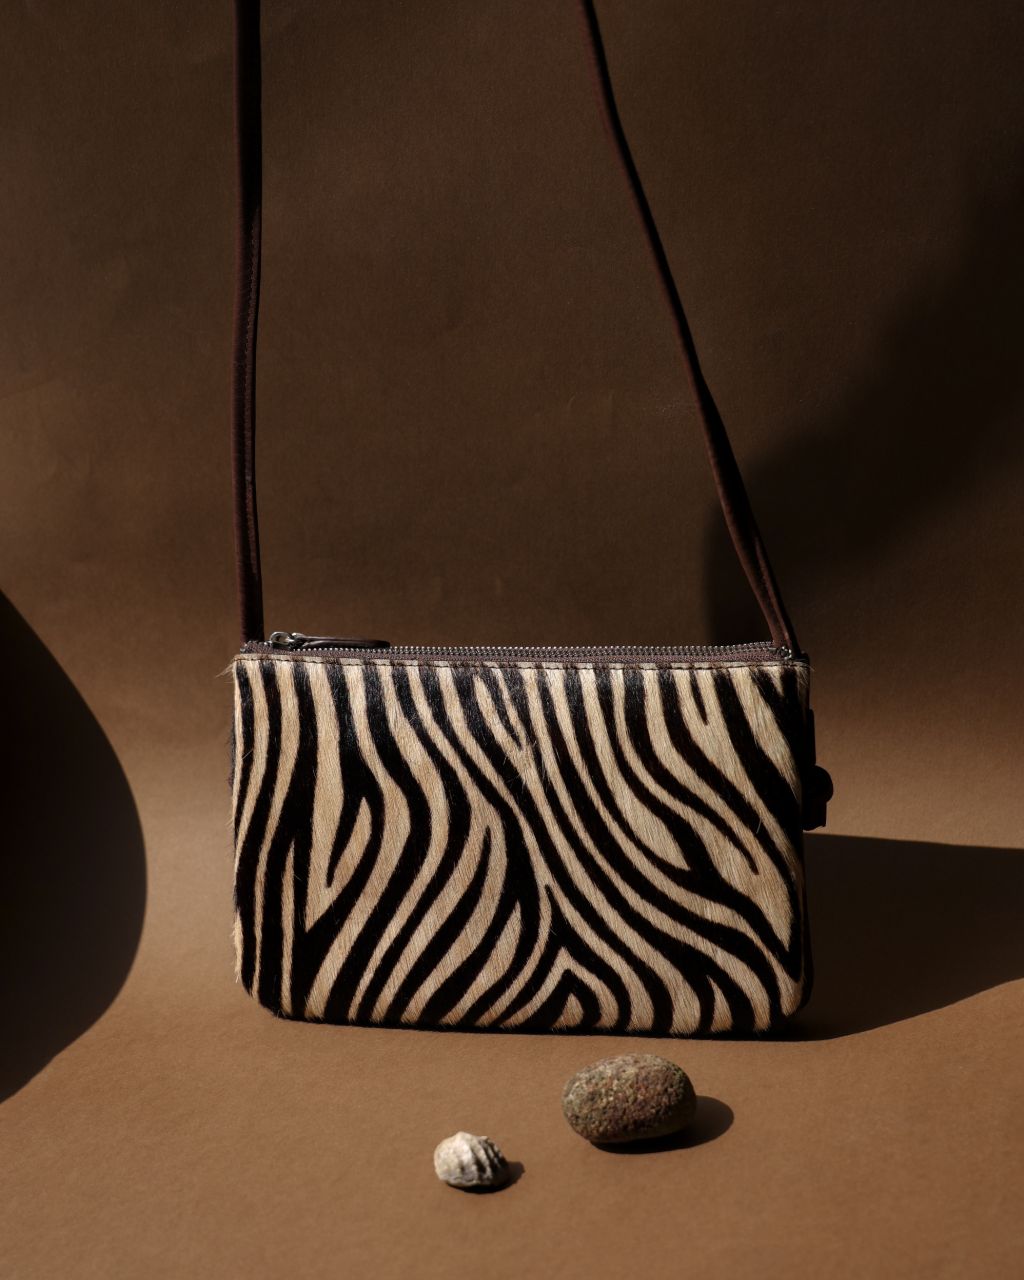 Zebra pattern Pony Hair leather crossbody bag in brown TL-14632H_front